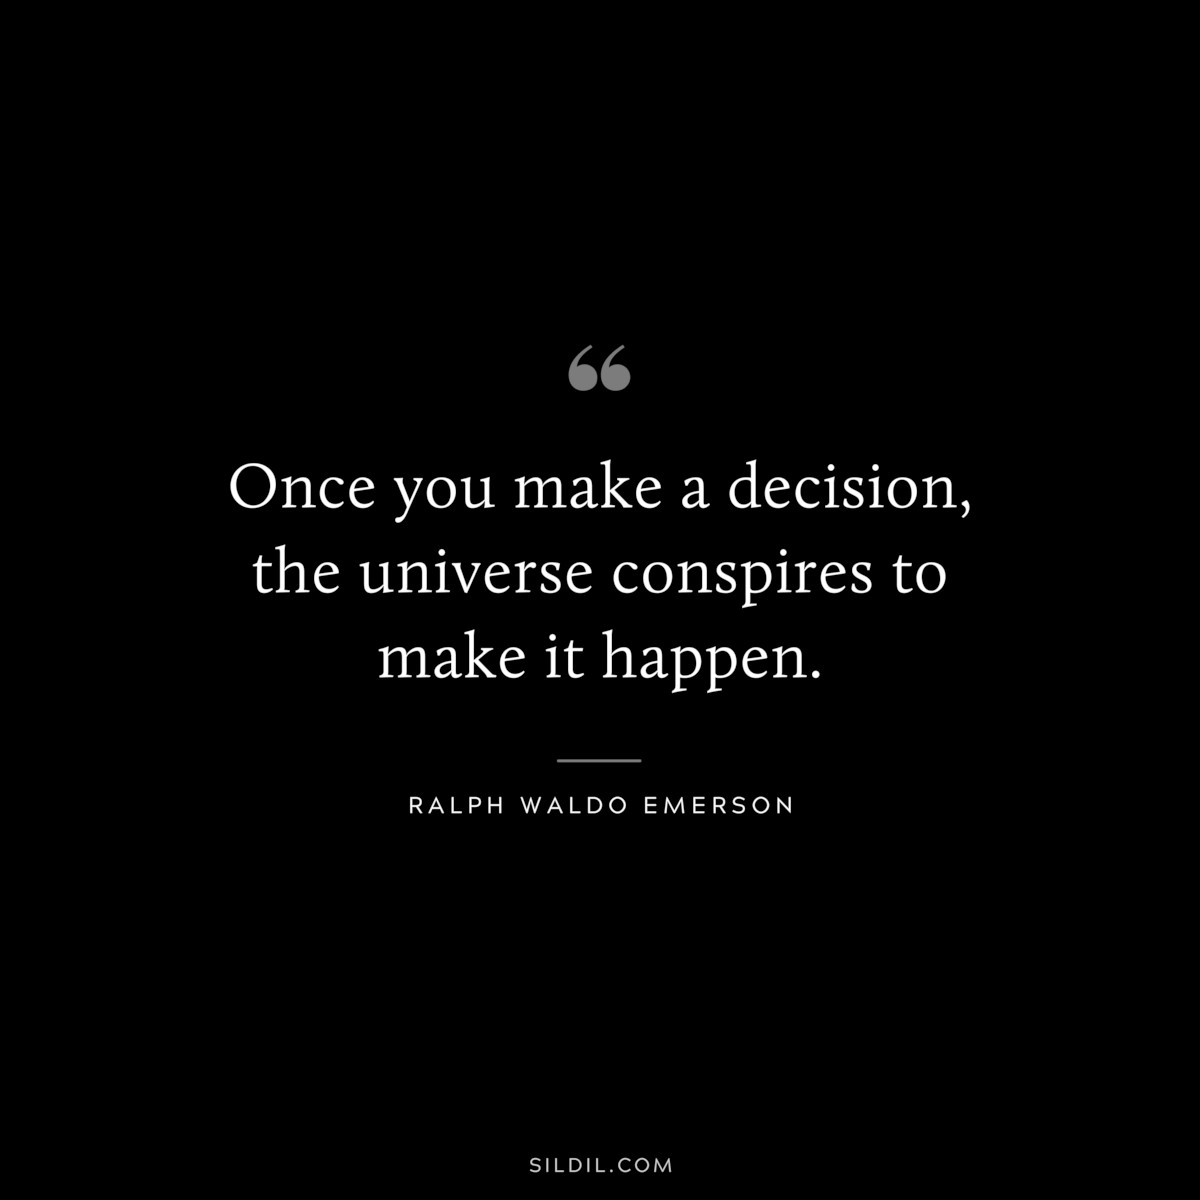 Once you make a decision, the universe conspires to make it happen. — Ralph Waldo Emerson